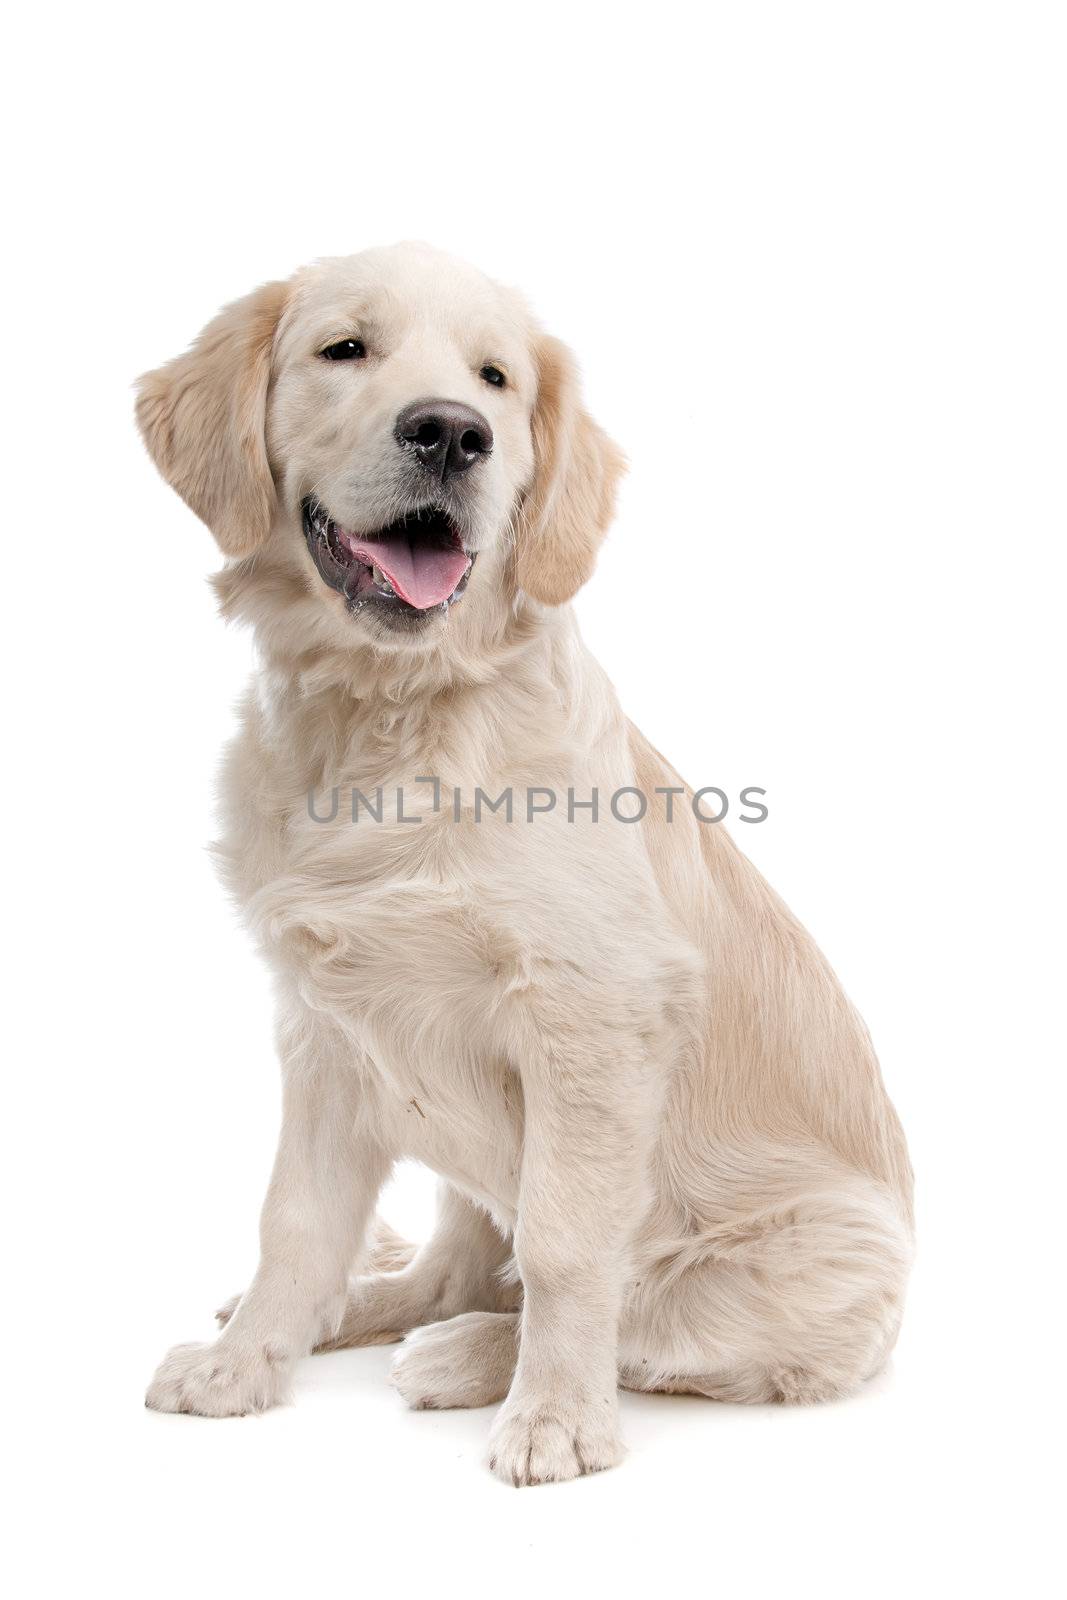 Golden retriever dog in front of a white background